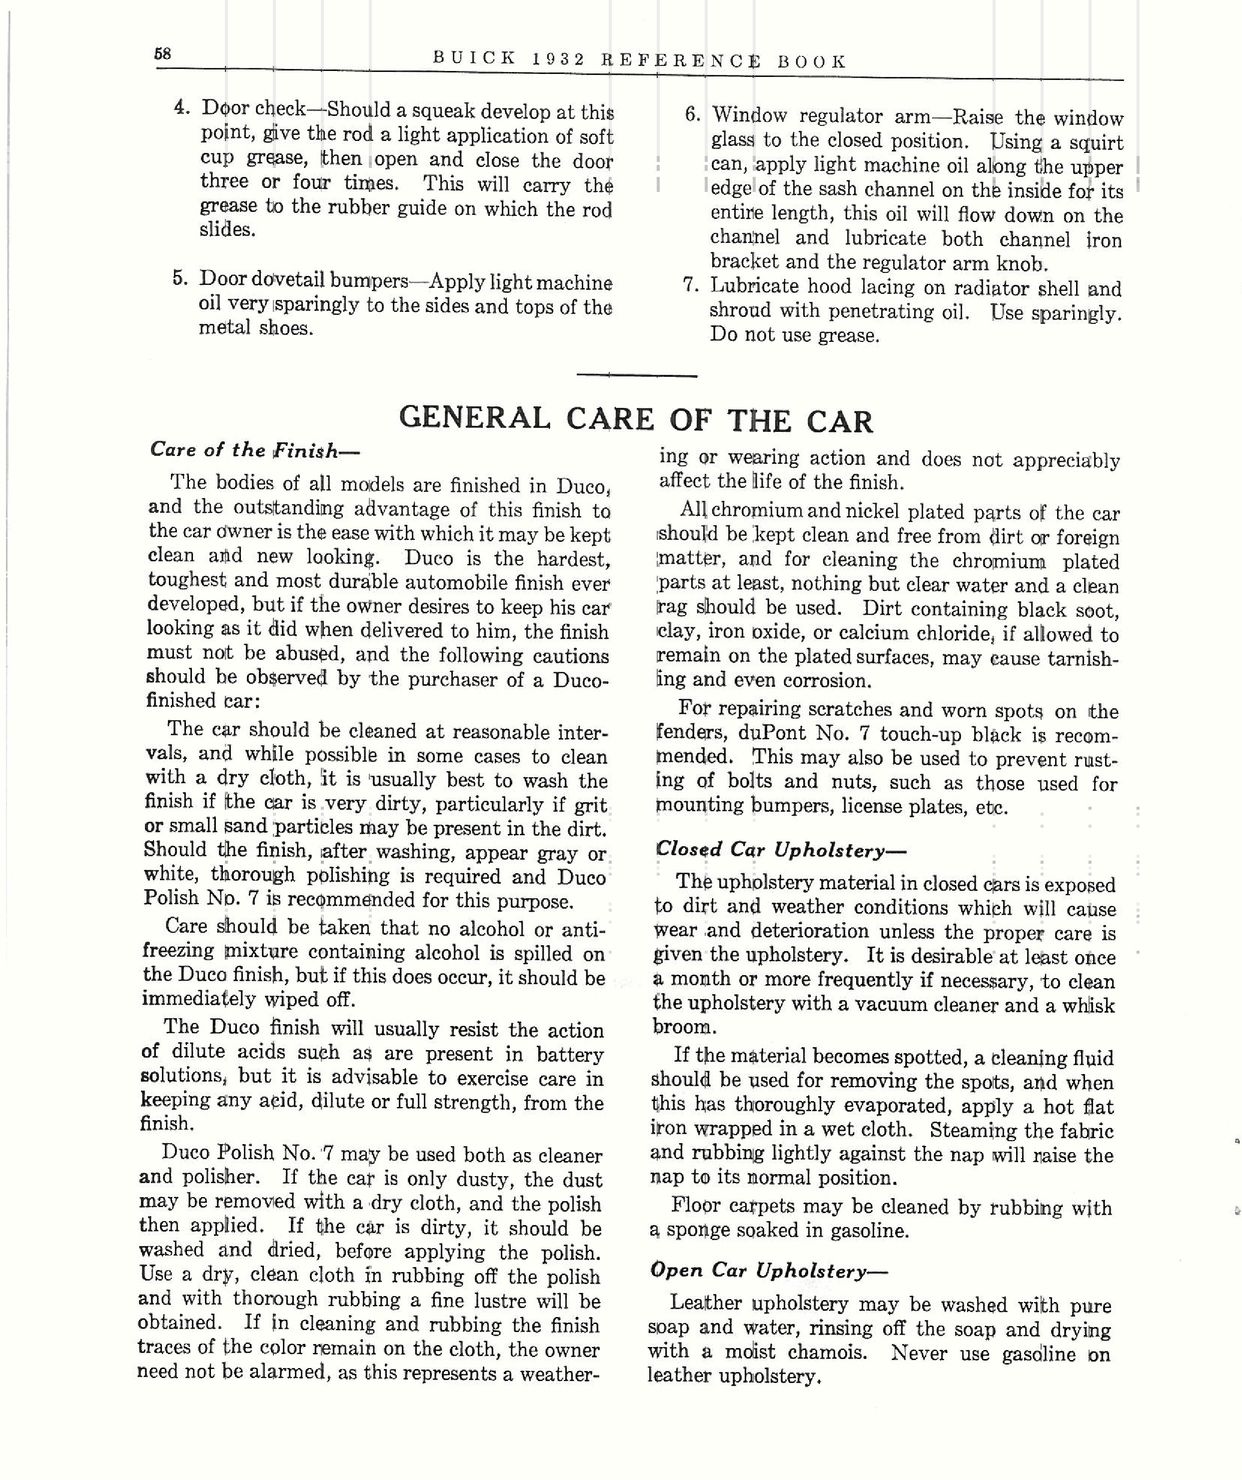 n_1932 Buick Reference Book-58.jpg